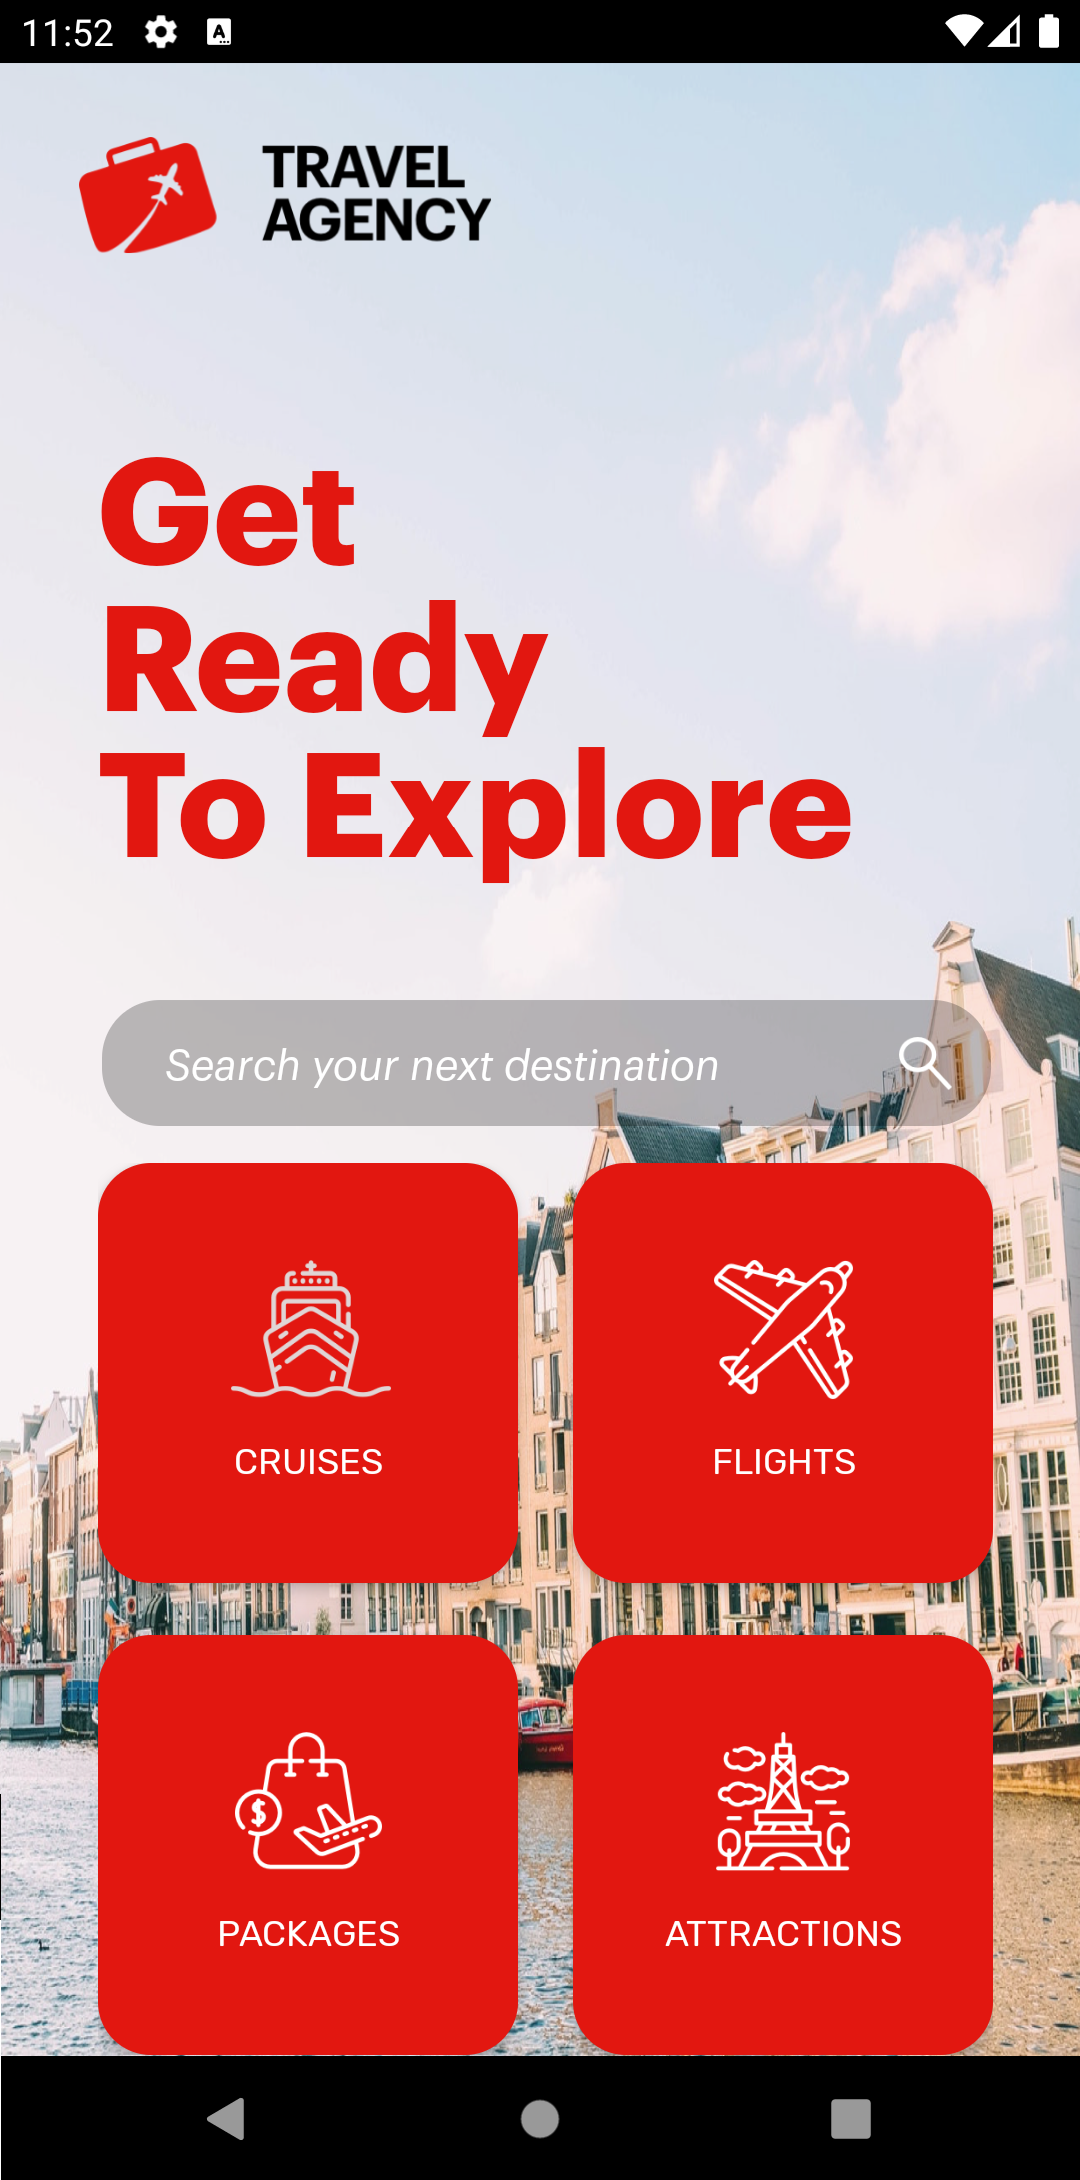 TravelAgency-MobileFrontnend-Android-Home_20211025123050_1_png